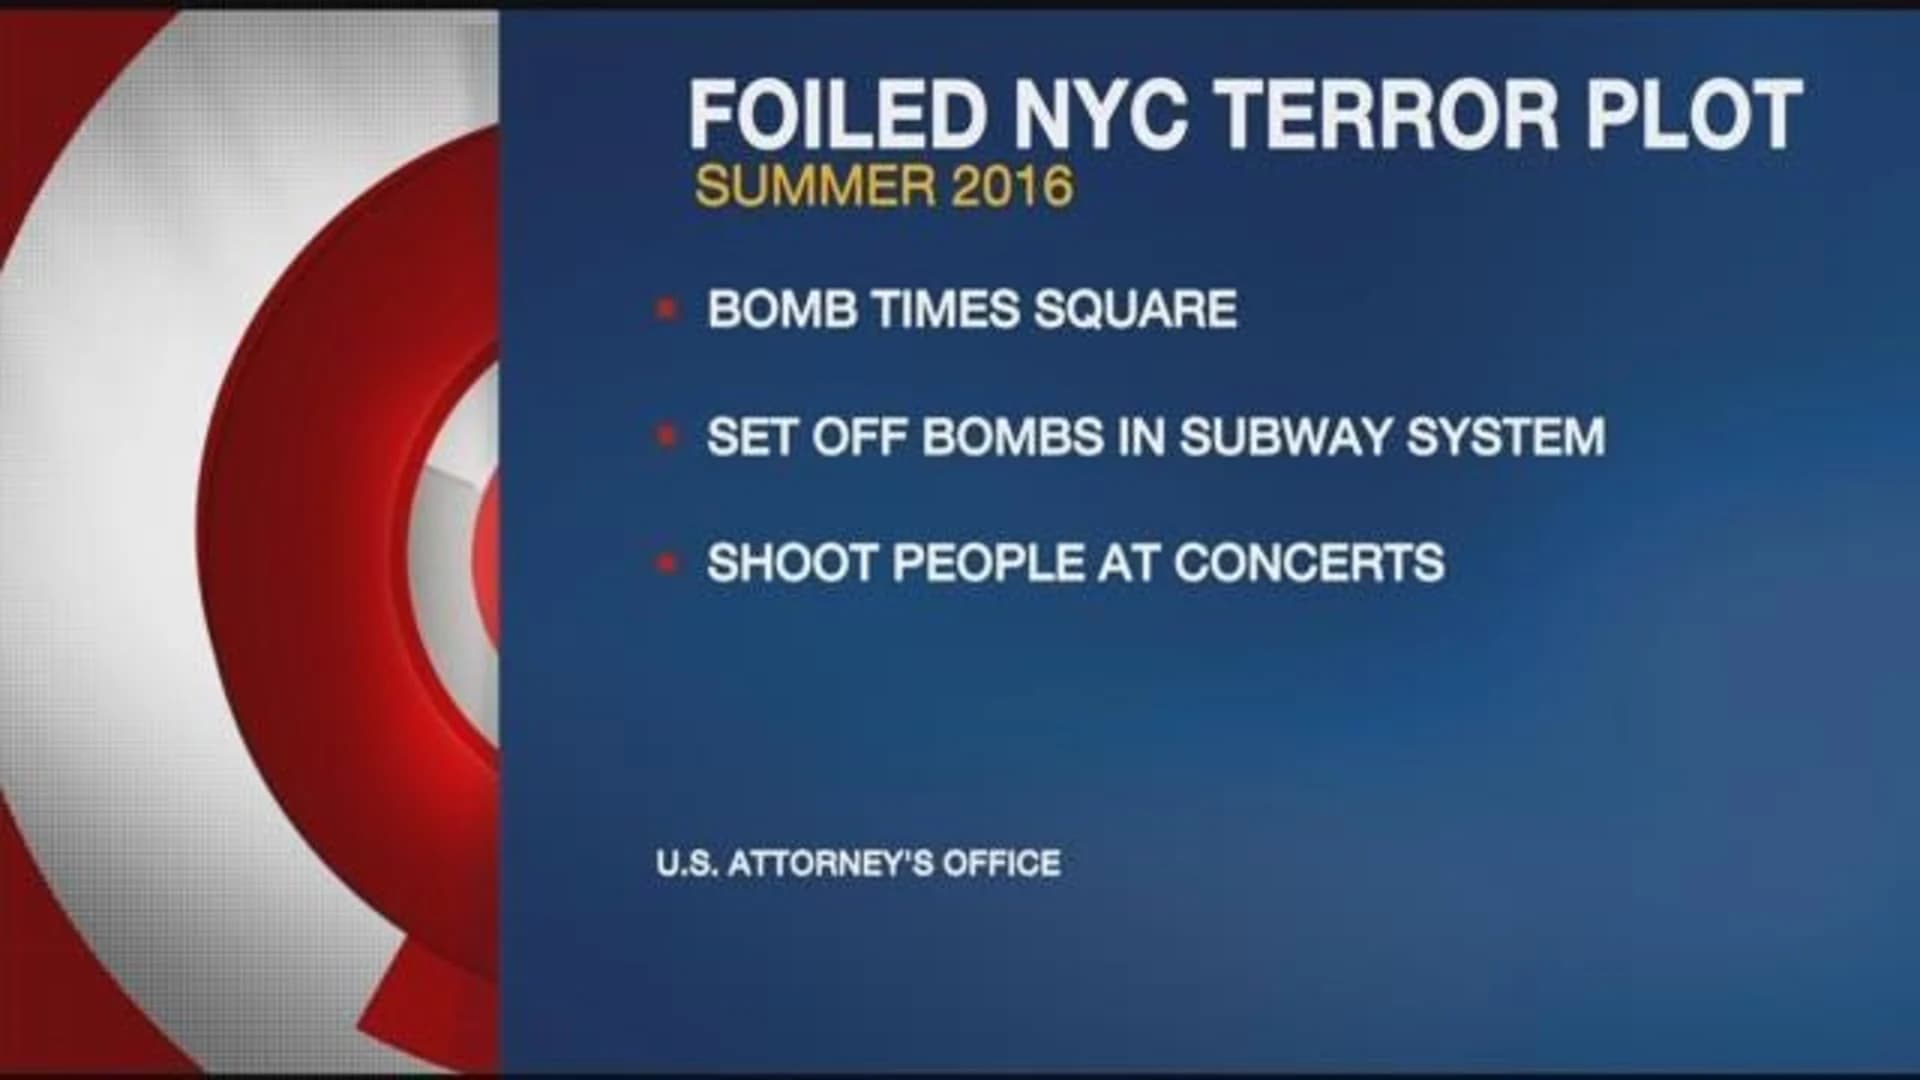 Feds say they thwarted NYC plot targeting concert venues